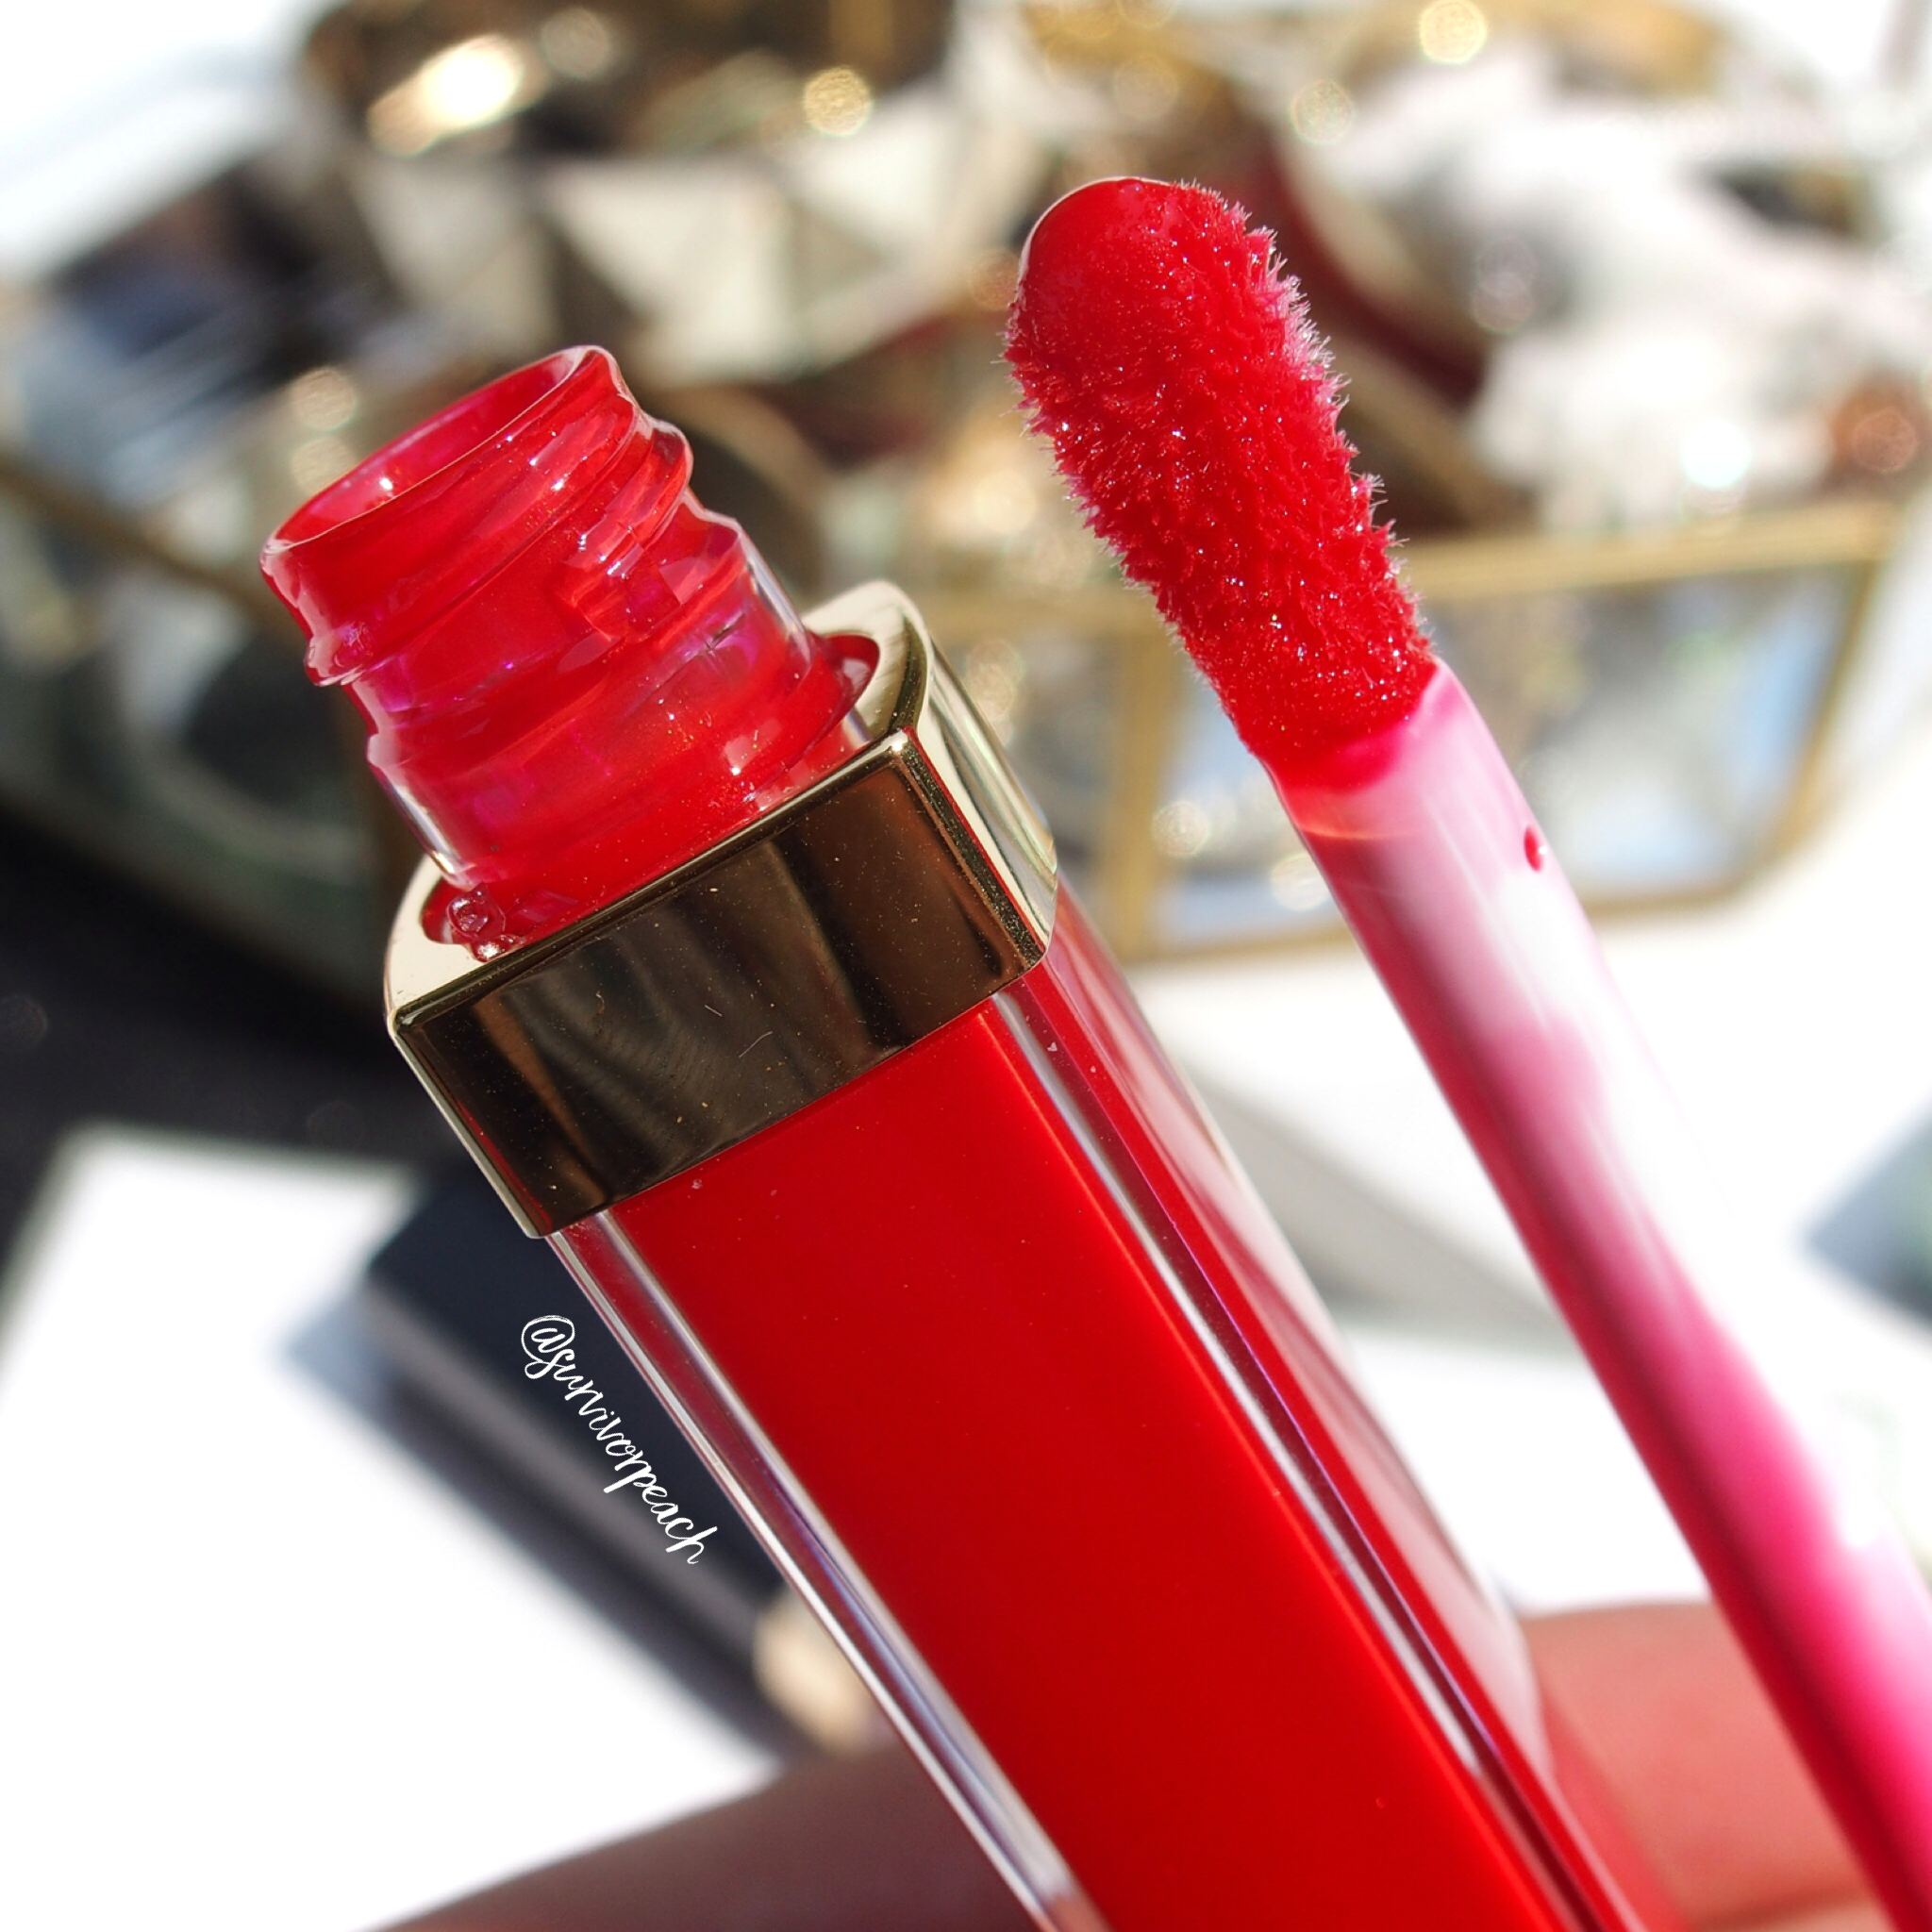 Chanel Coco Gloss: My love for Gloss is back! + Chanel Tweed Coral